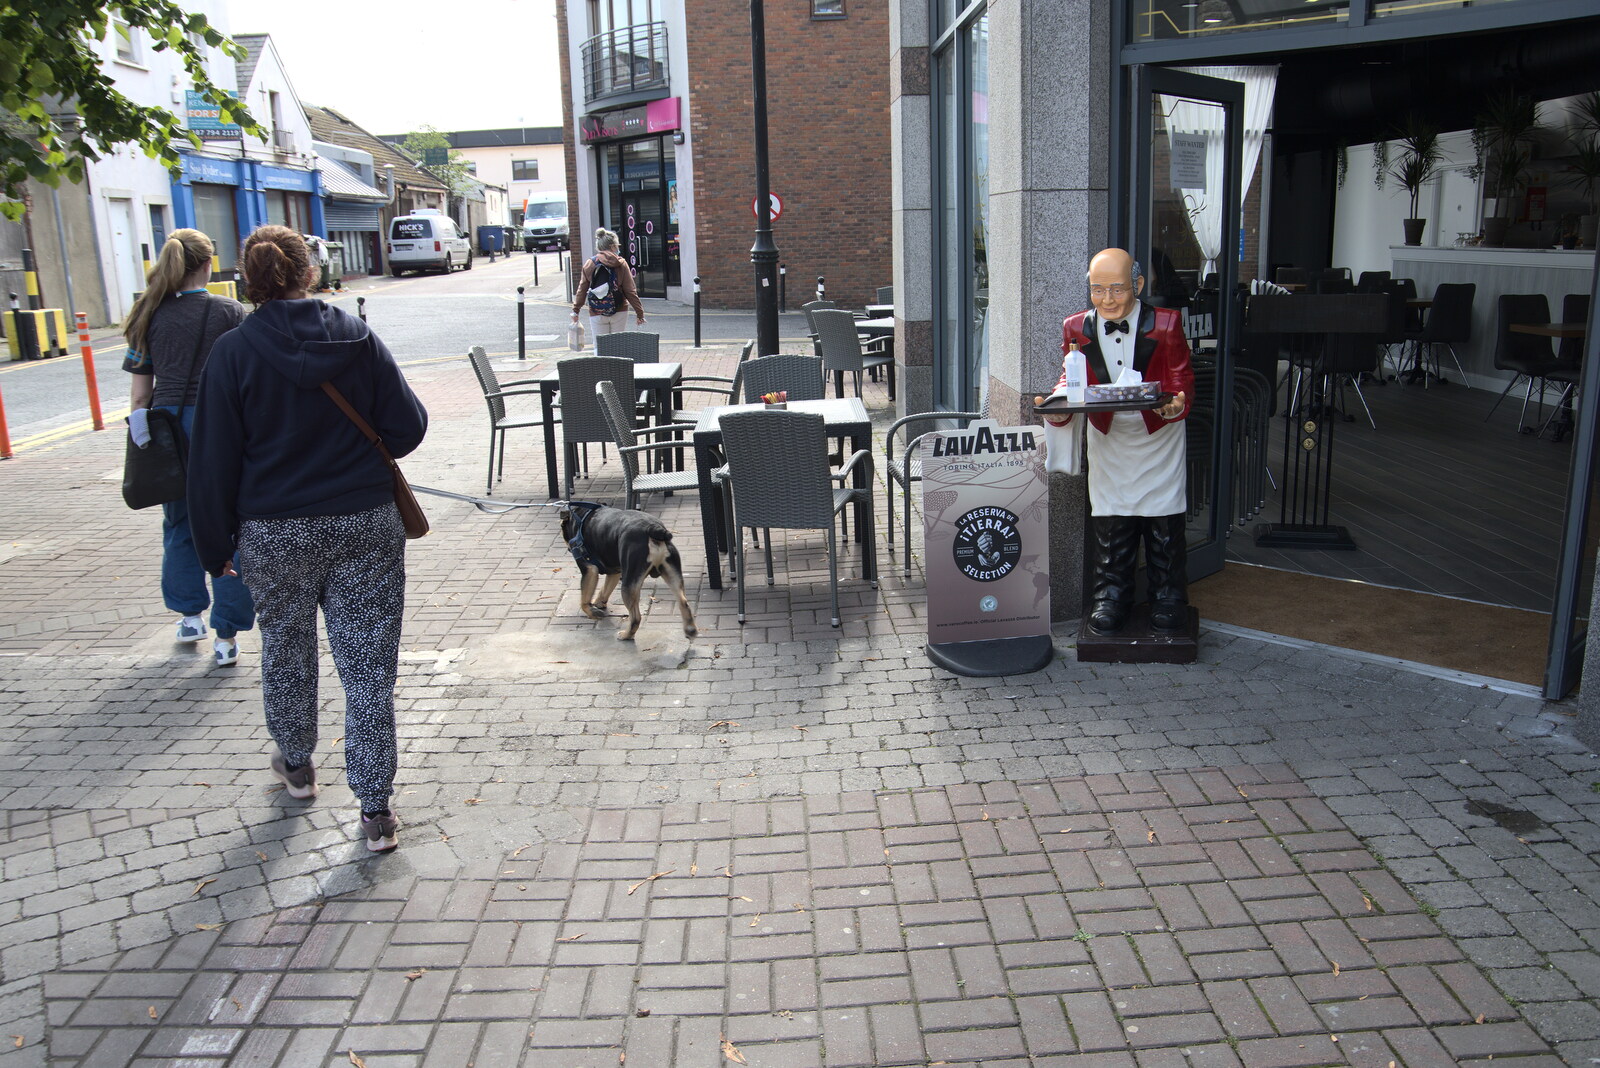 A waiter statue outside a café from Manorhamilton and the Street Art of Dún Laoghaire, Ireland - 15th August 2021